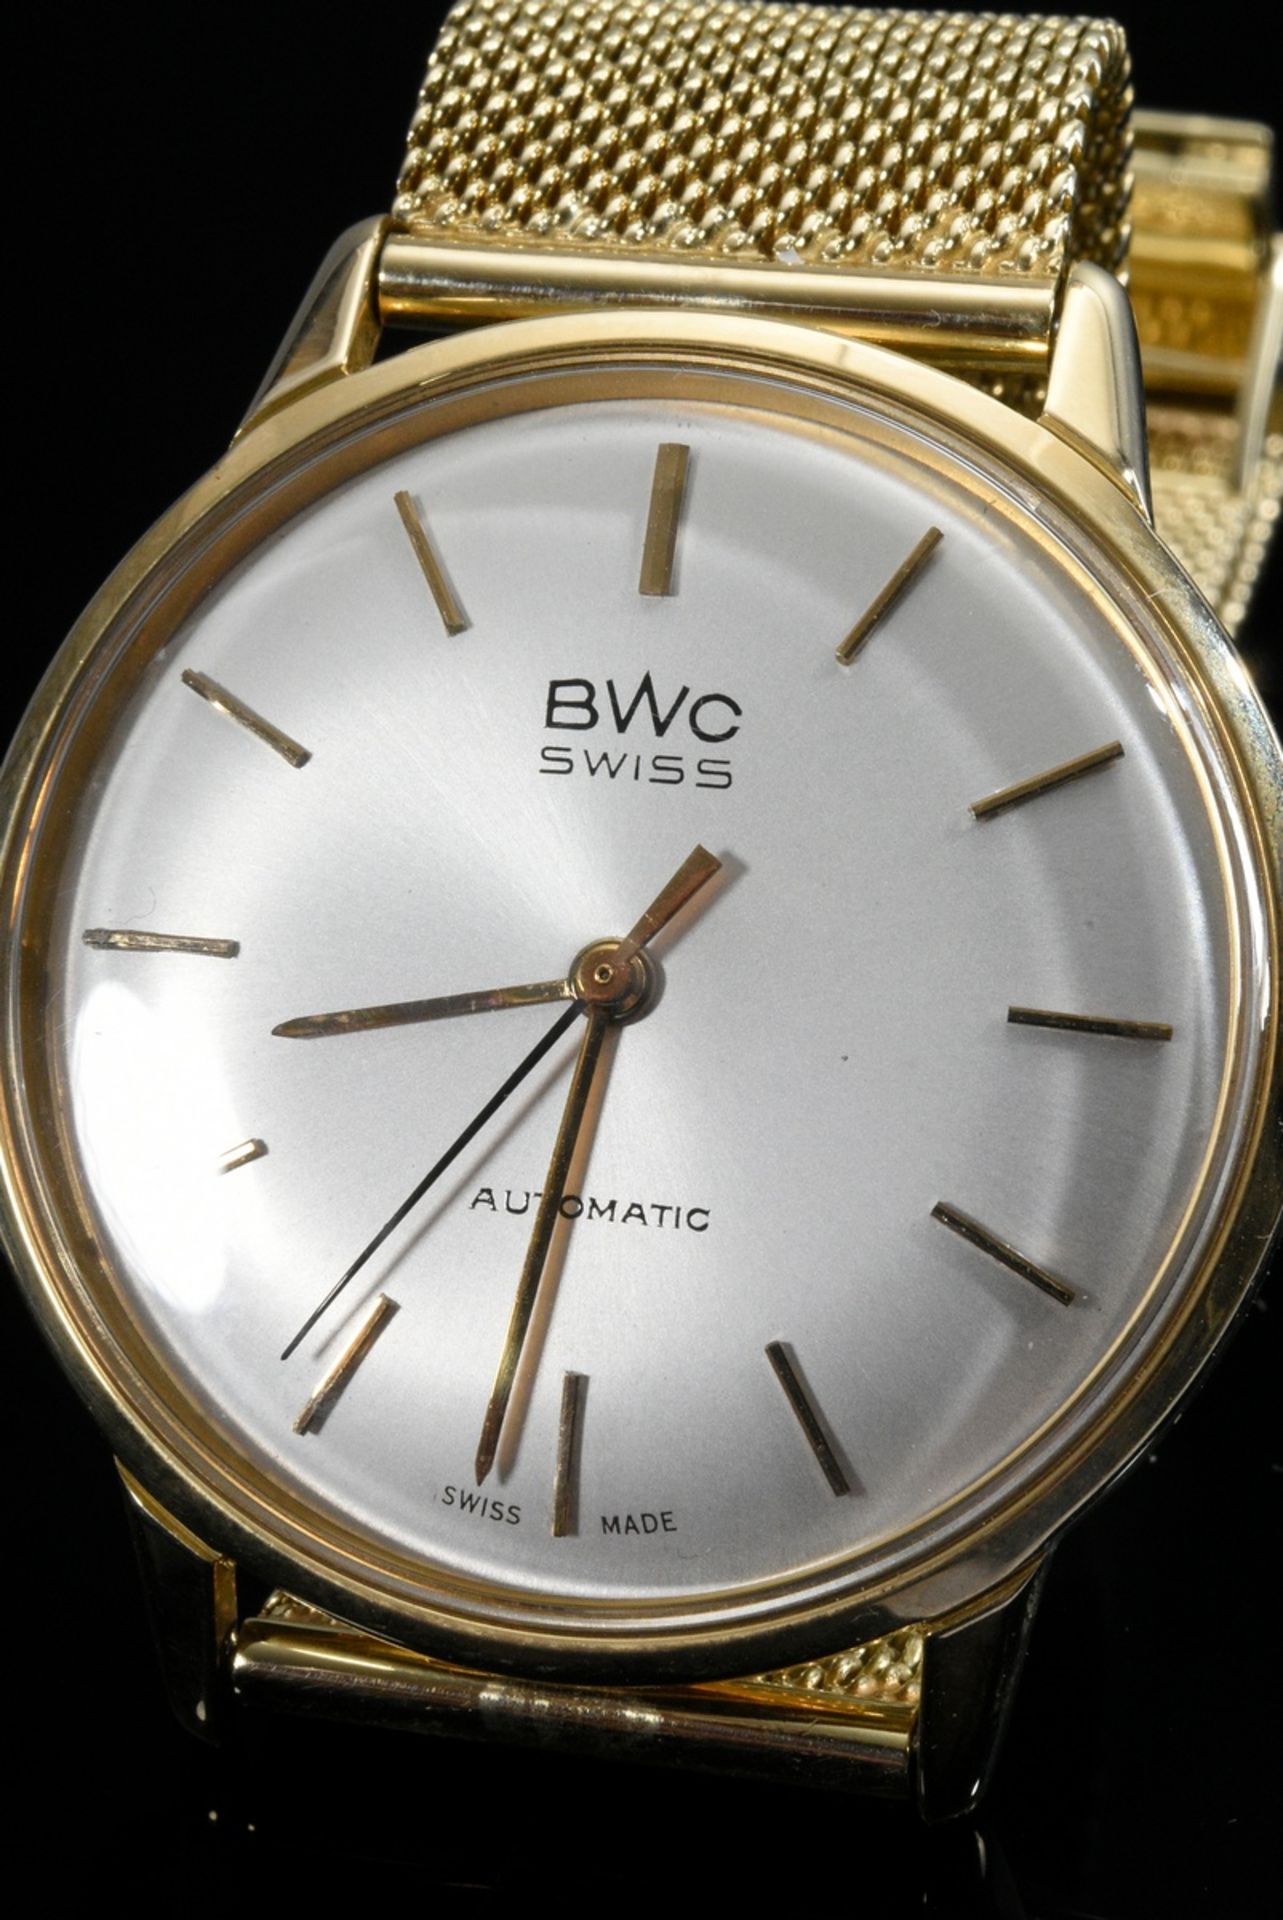 BWC Swiss yellow gold 585 men's wristwatch, automatic, Milanaise bracelet (worn), hour markers, lar - Image 4 of 4